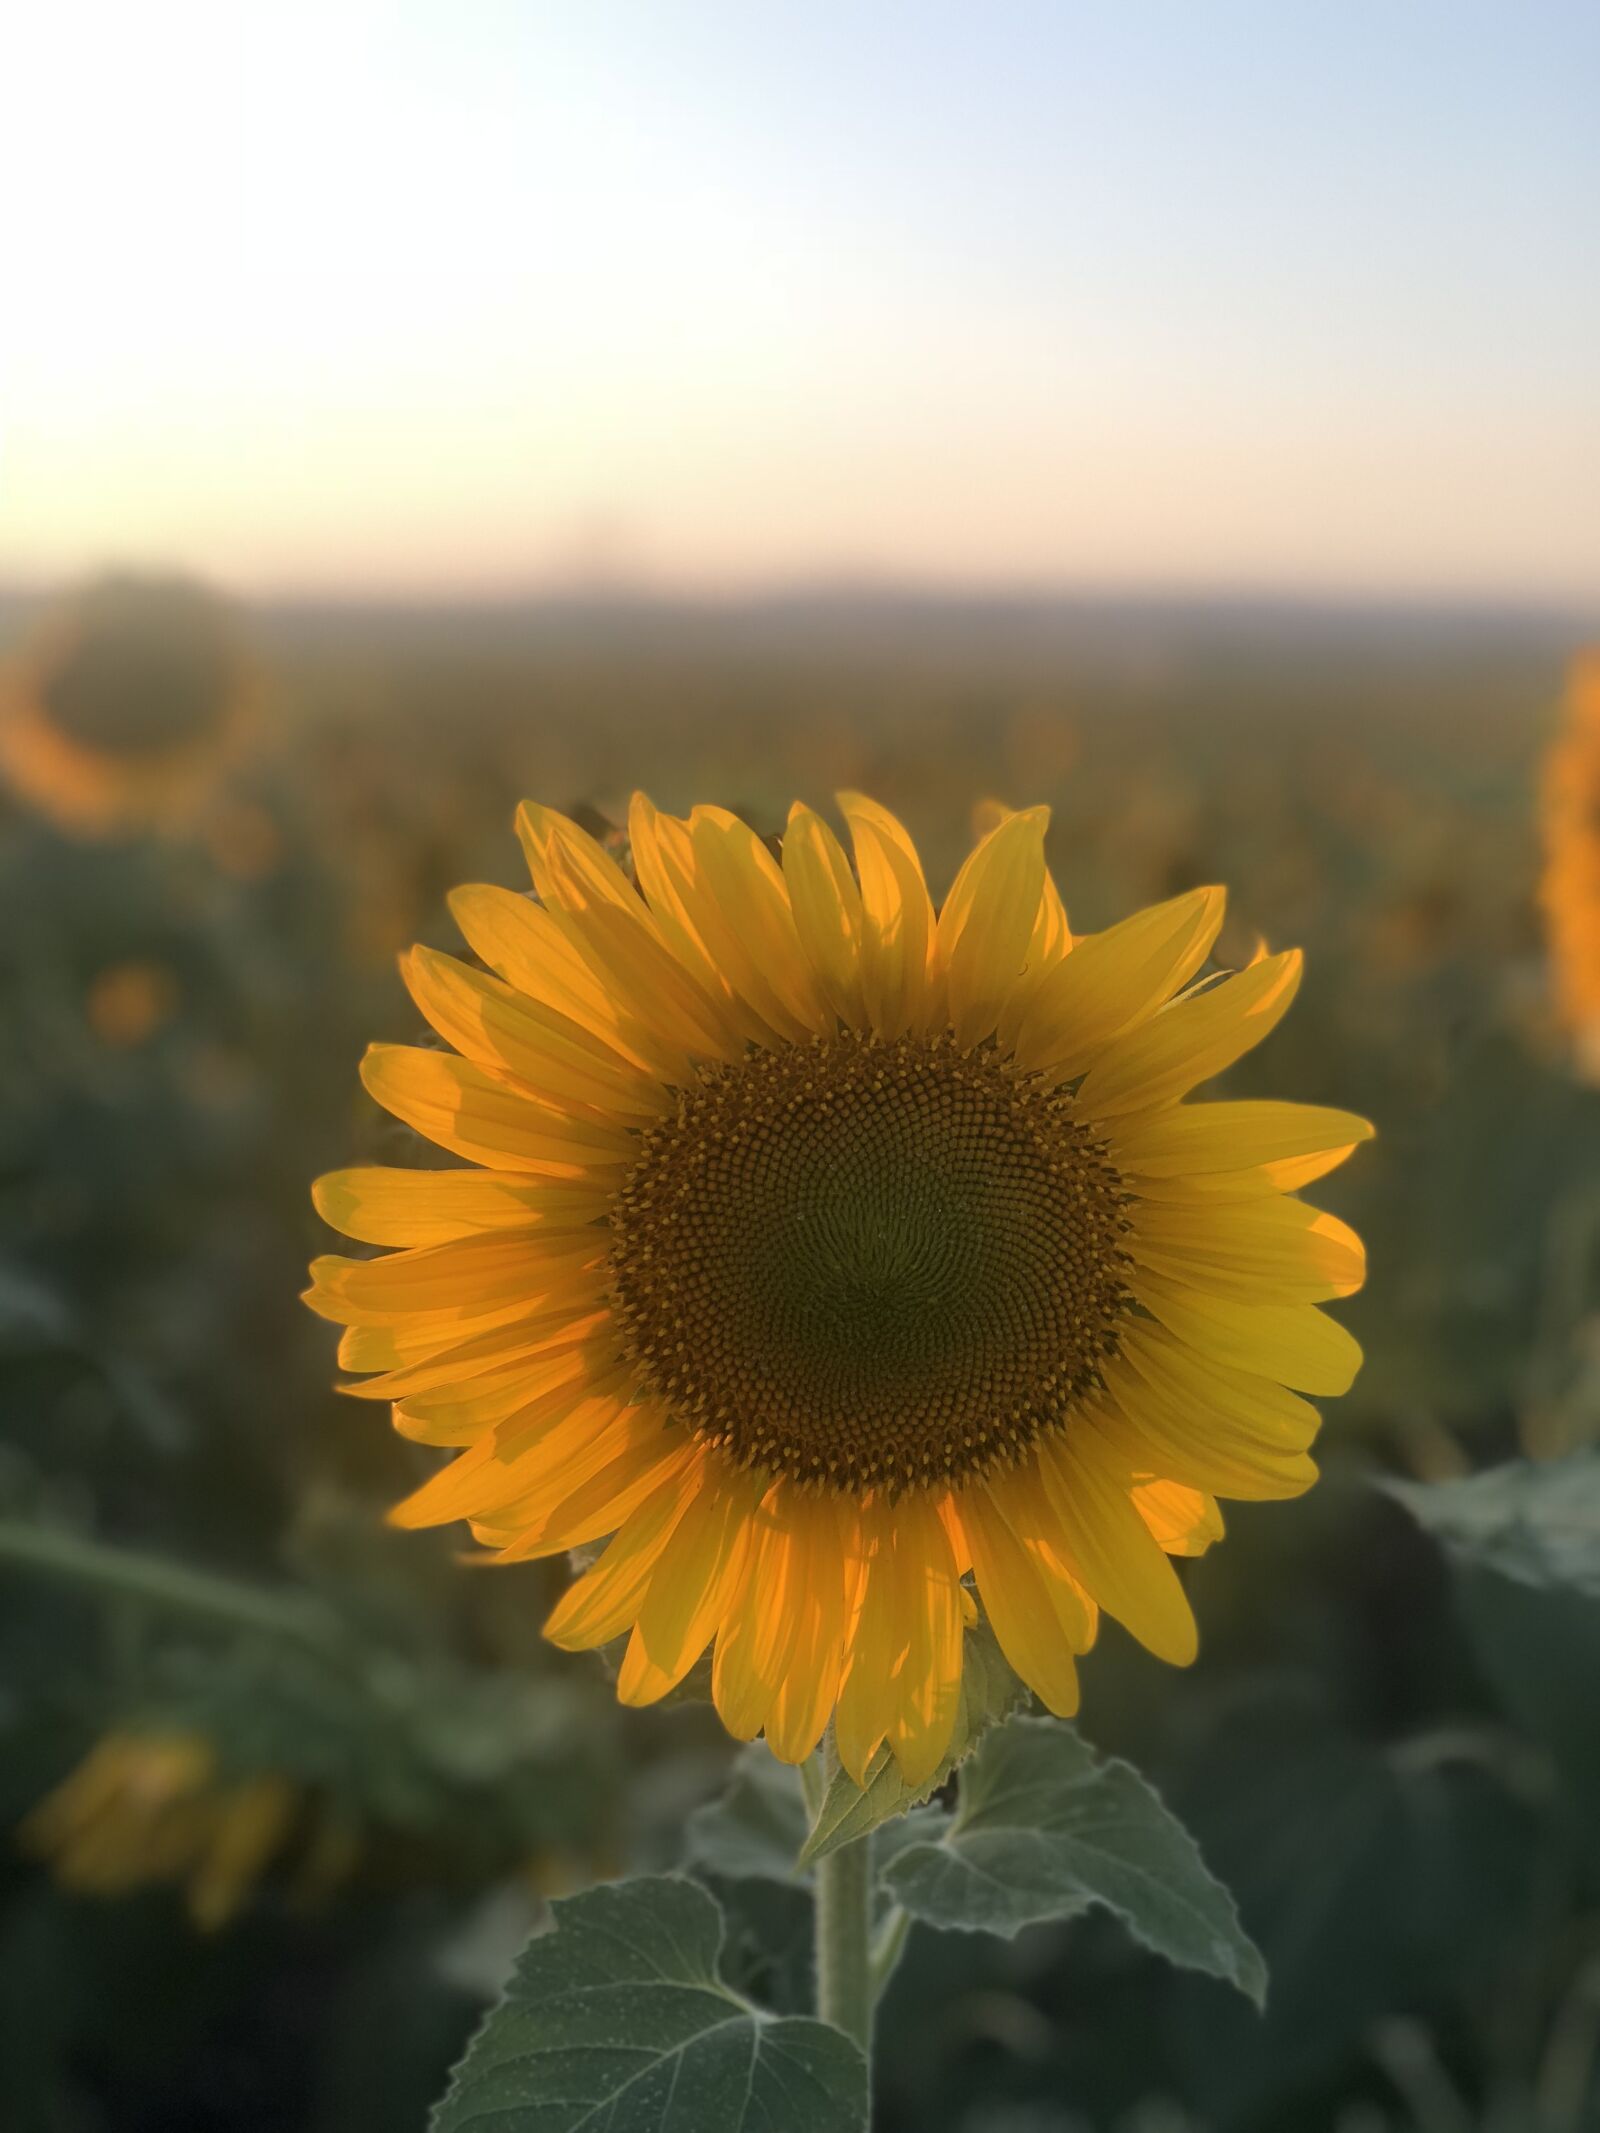 iPhone 8 Plus back dual camera 6.6mm f/2.8 sample photo. Sunflower, flower, yellow photography